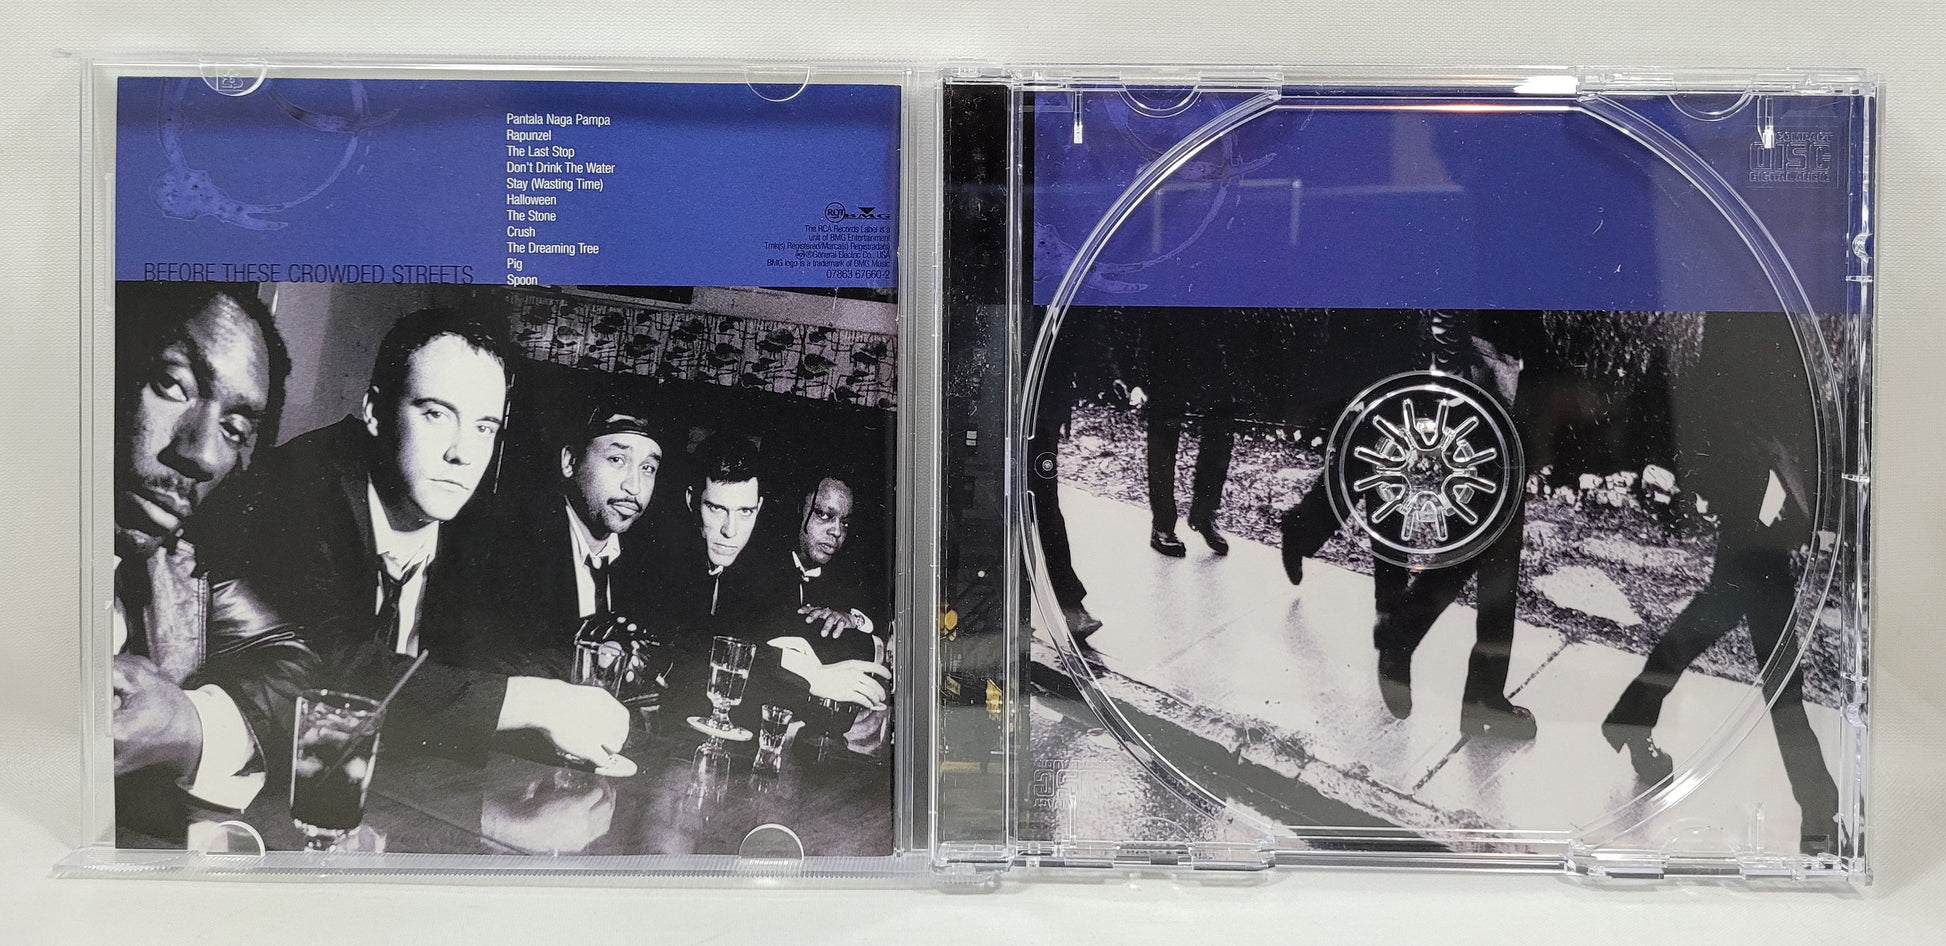 Dave Matthews Band - Before These Crowded Streets [1998 Used CD]